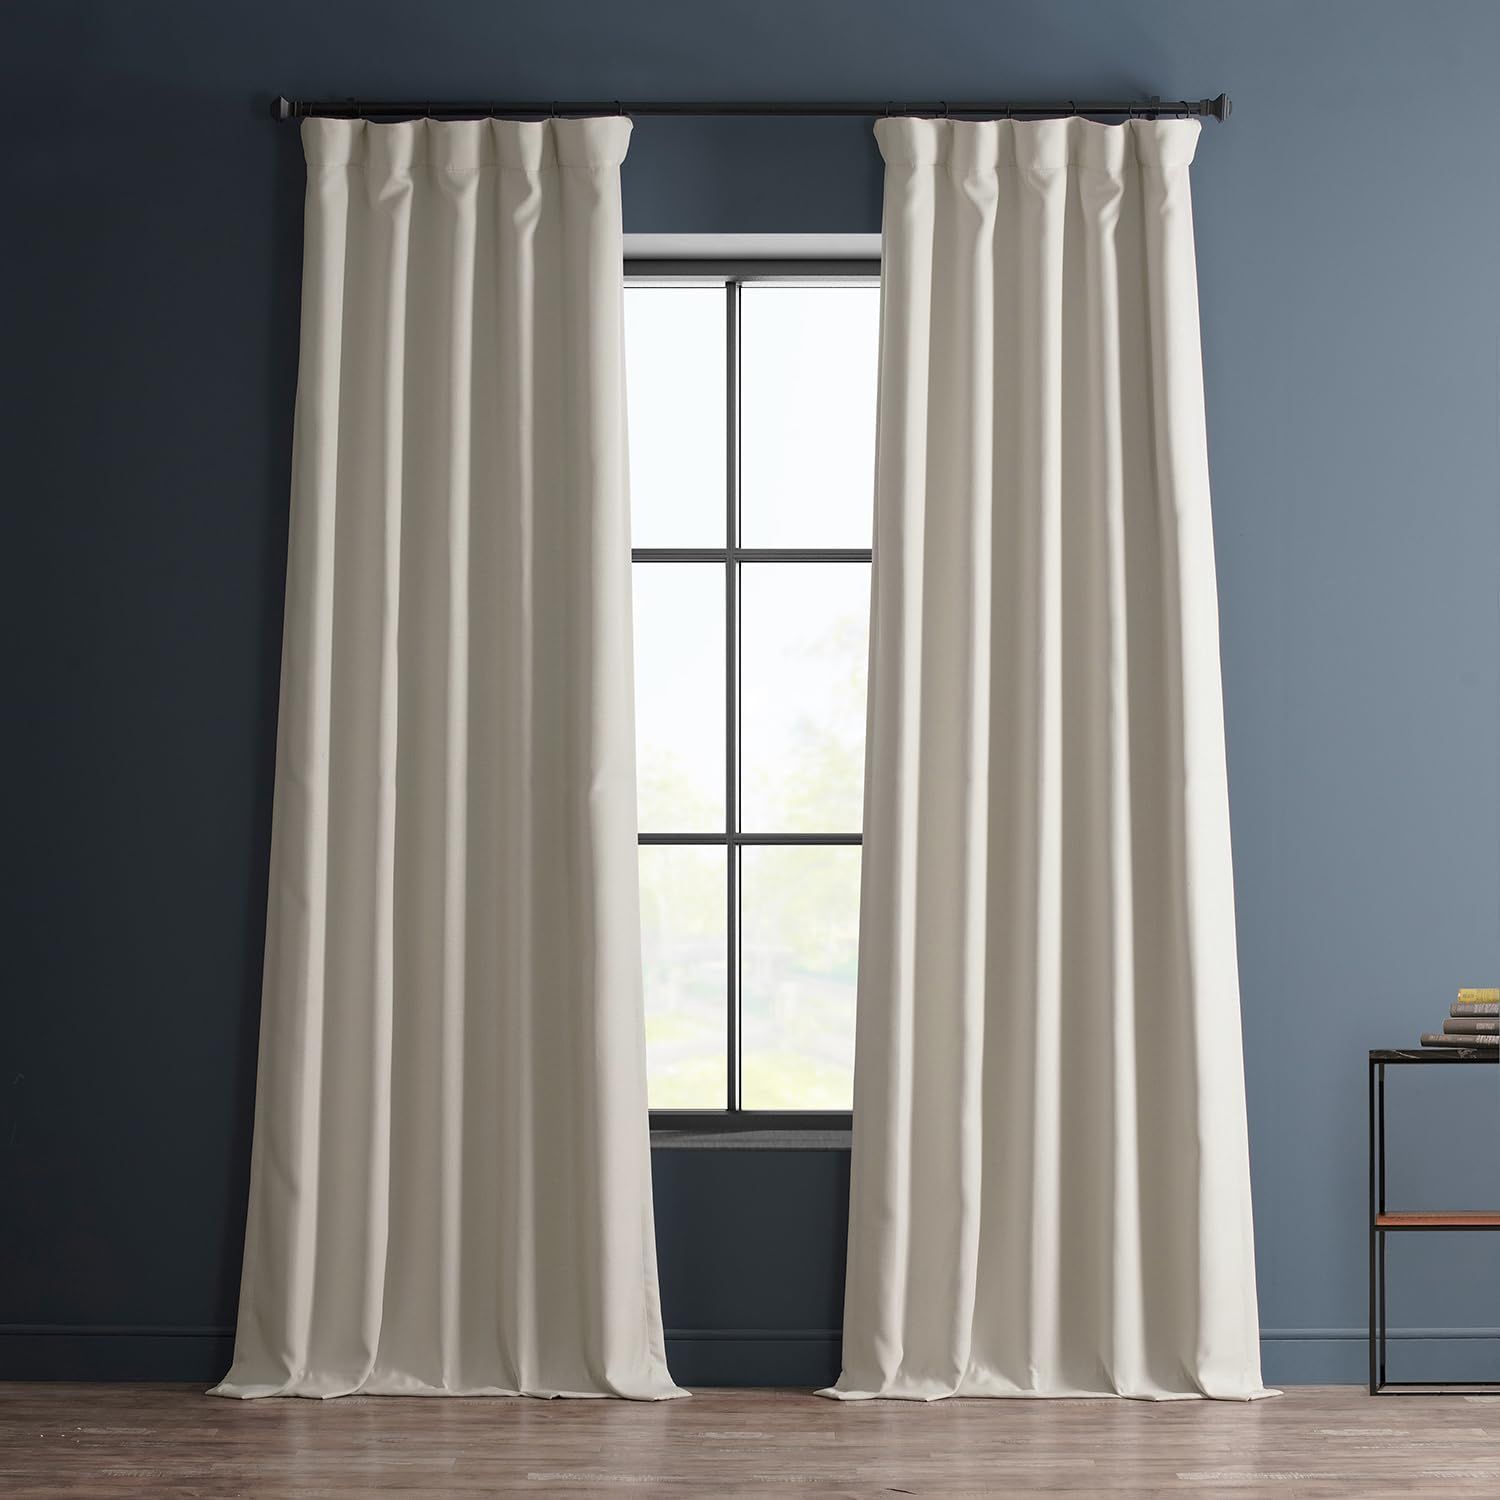 HPD Half Price Drapes Faux Linen Room Darkening Curtains - 120 Inches Long Luxury Linen Curtains ... | Amazon (US)